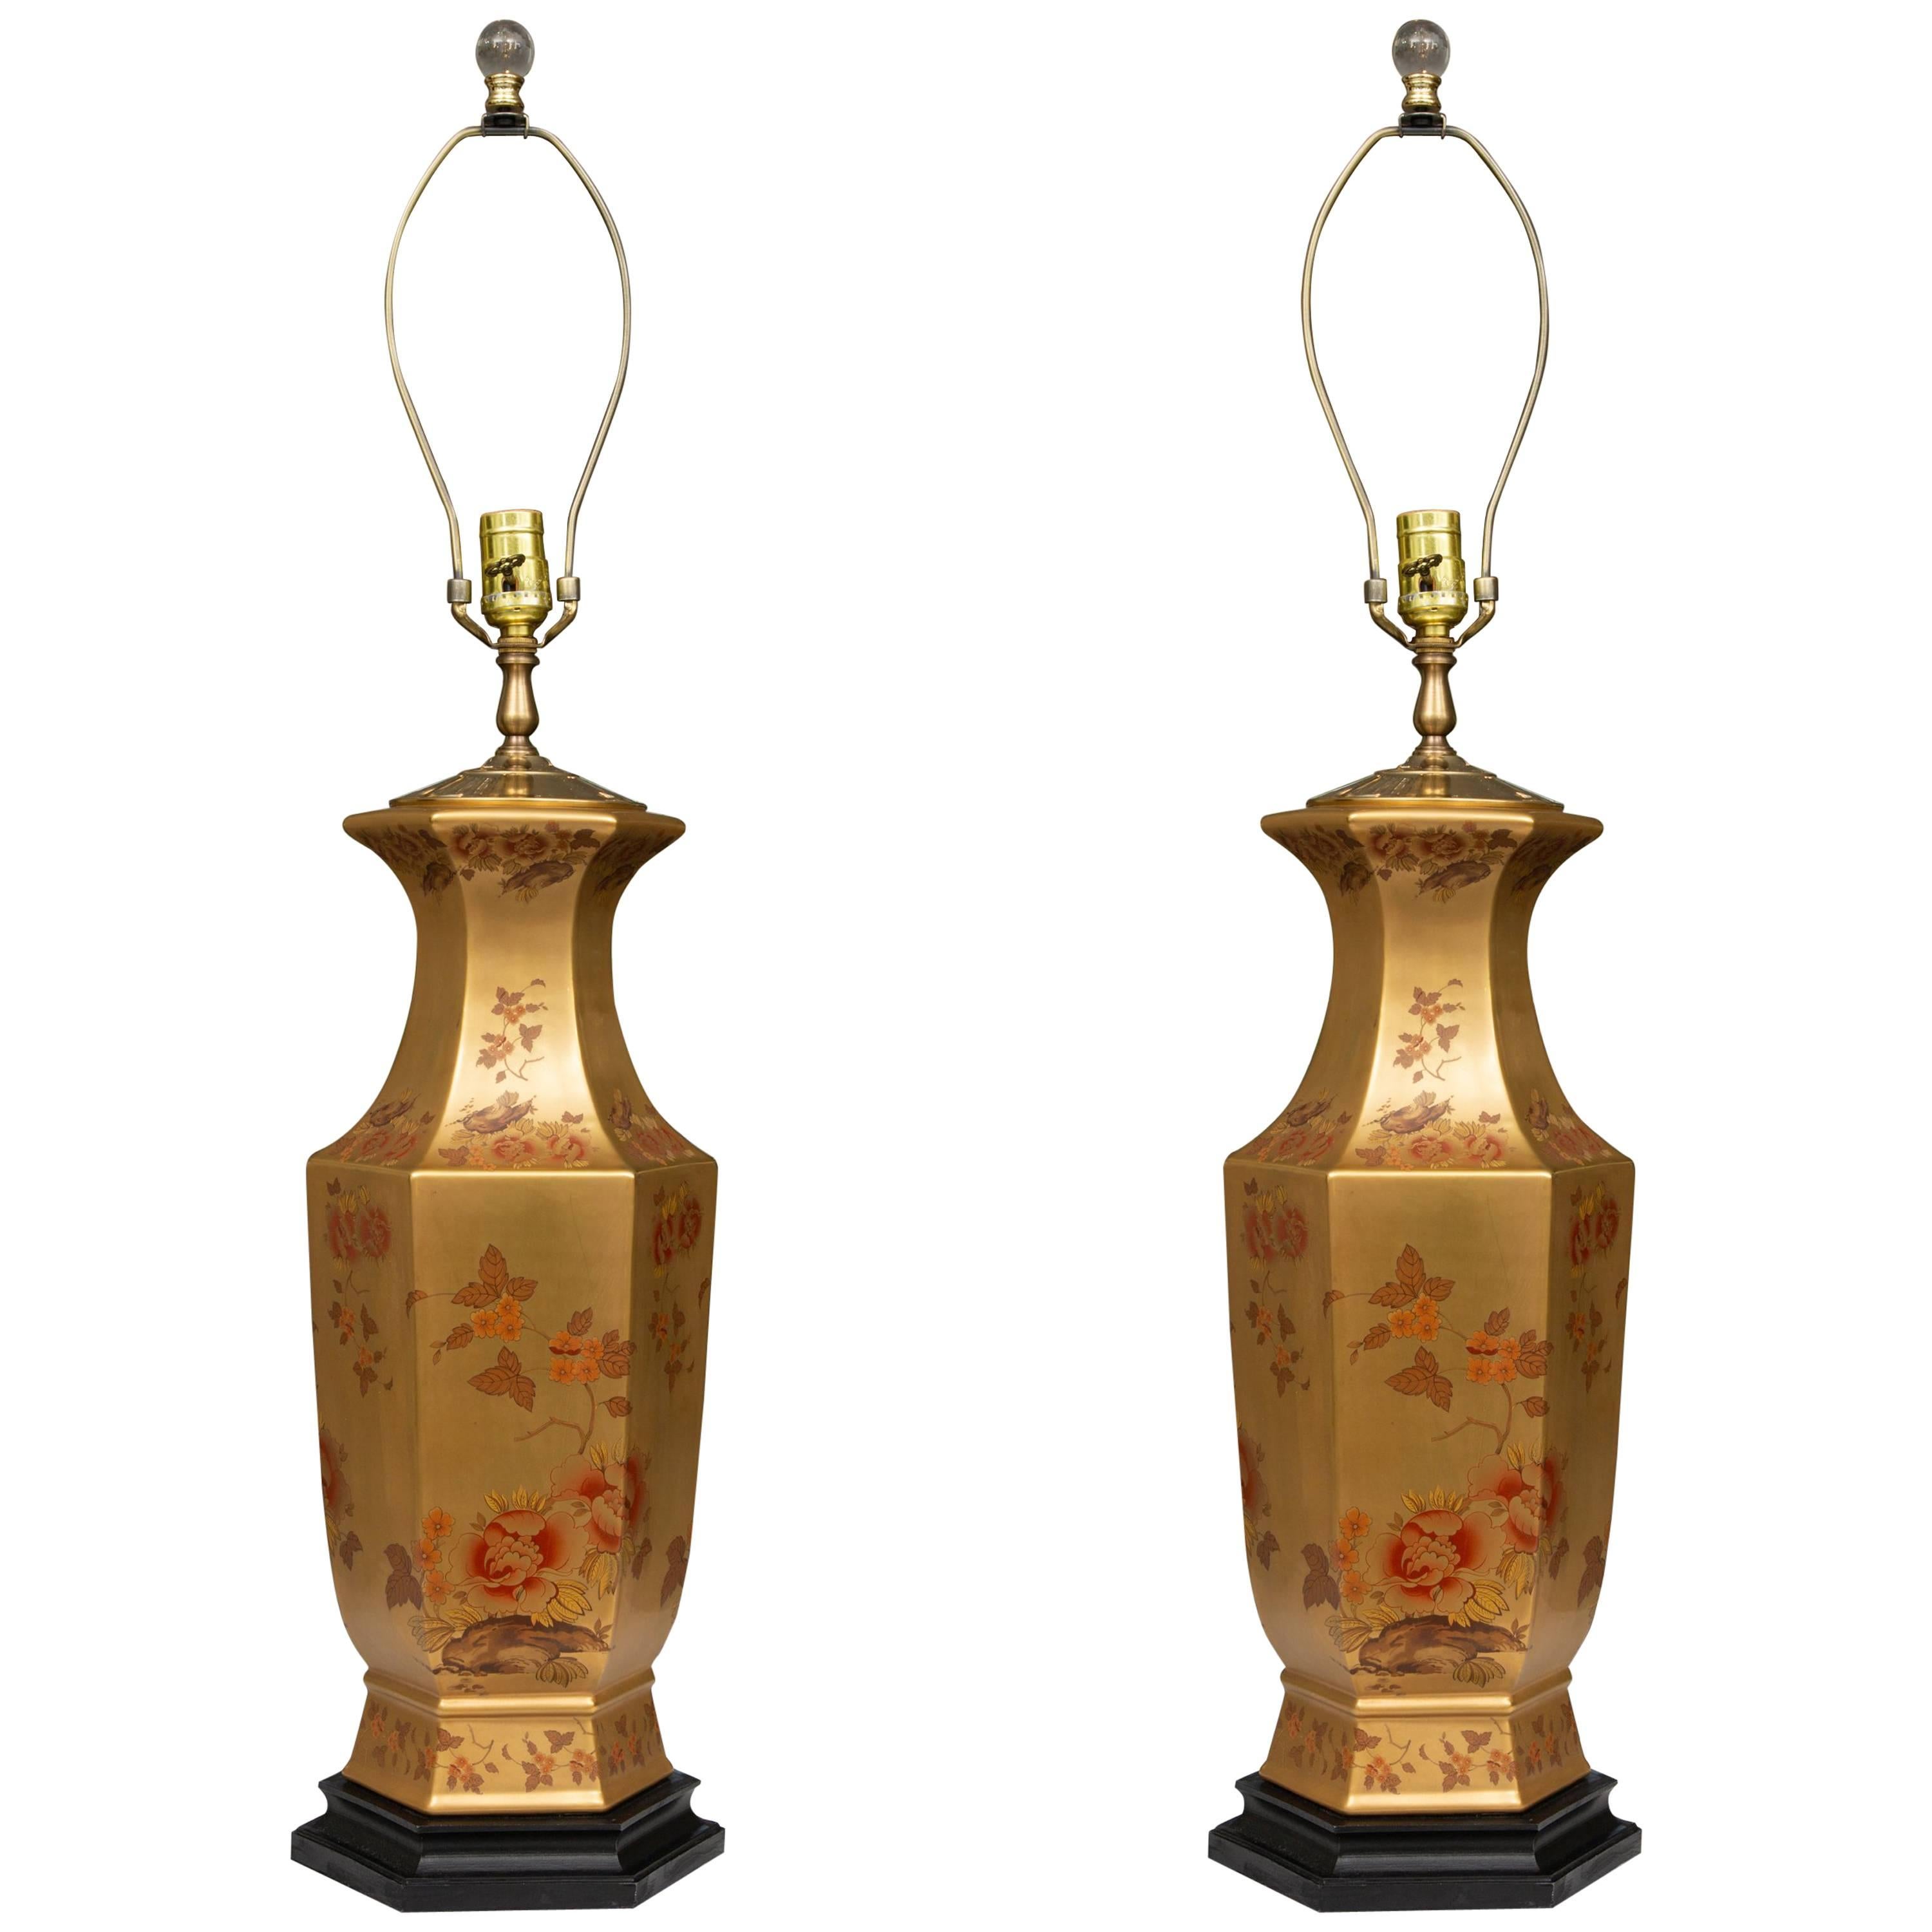 Pair of Gilt Table Lamps with Floral Design